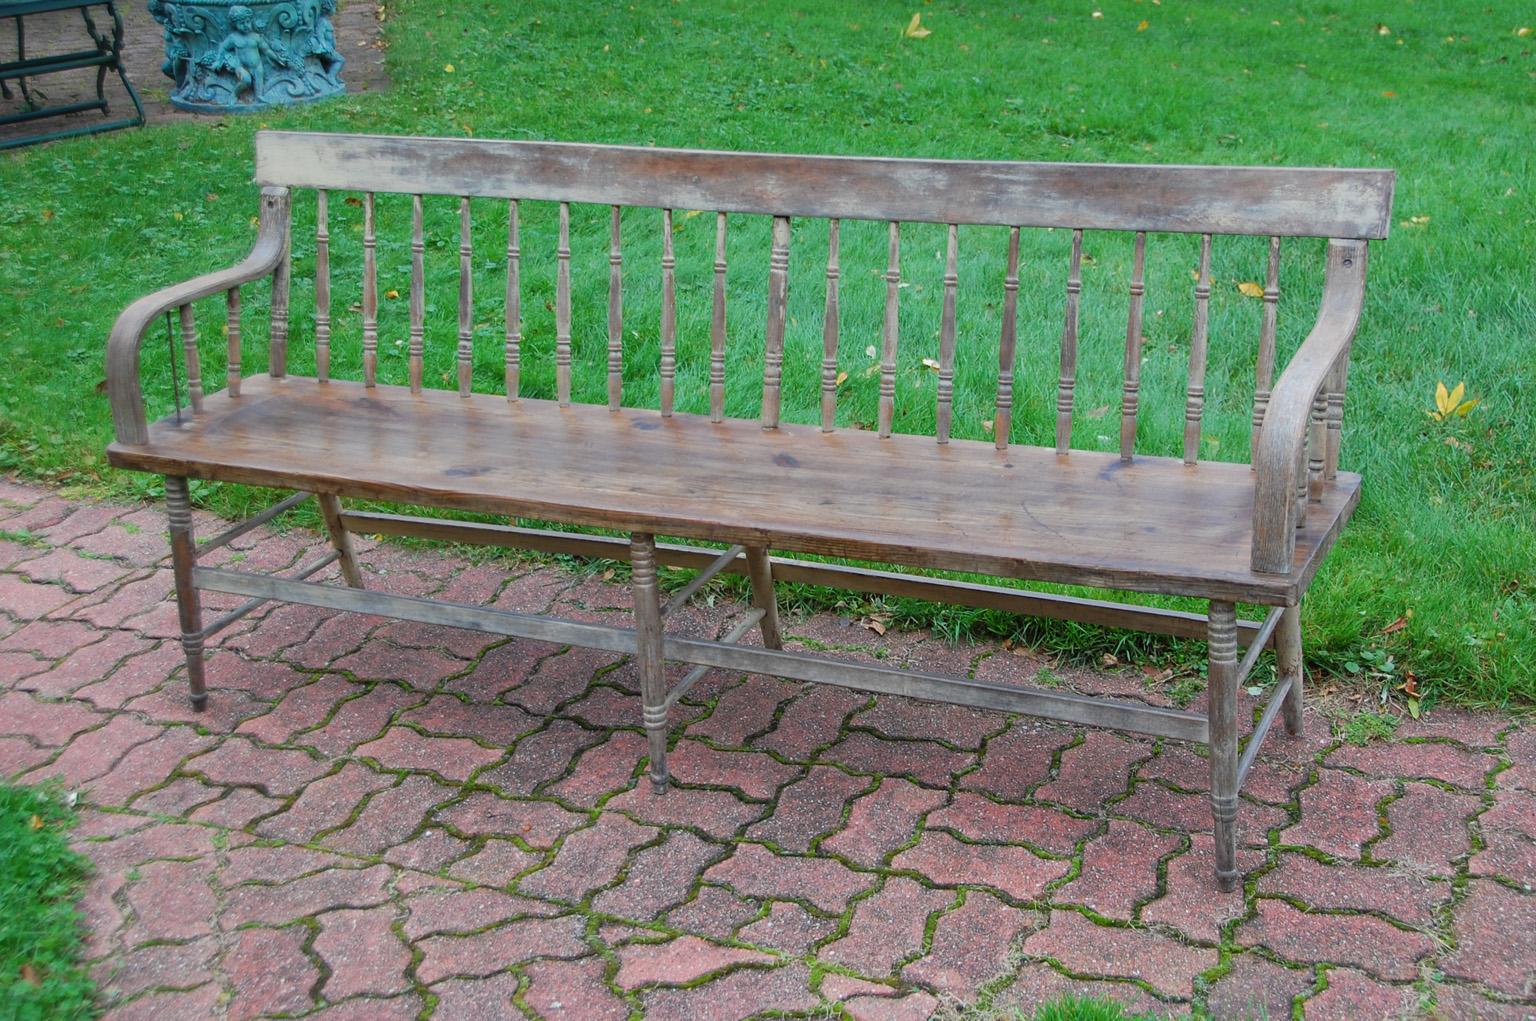 American mid 19th century spindleback bench with remnants of original paint. This six foot long bench has six legs, steam bent arms, interestingly turned spindles, and box stretchers. We have gone over this handsome bench and made sure that all of